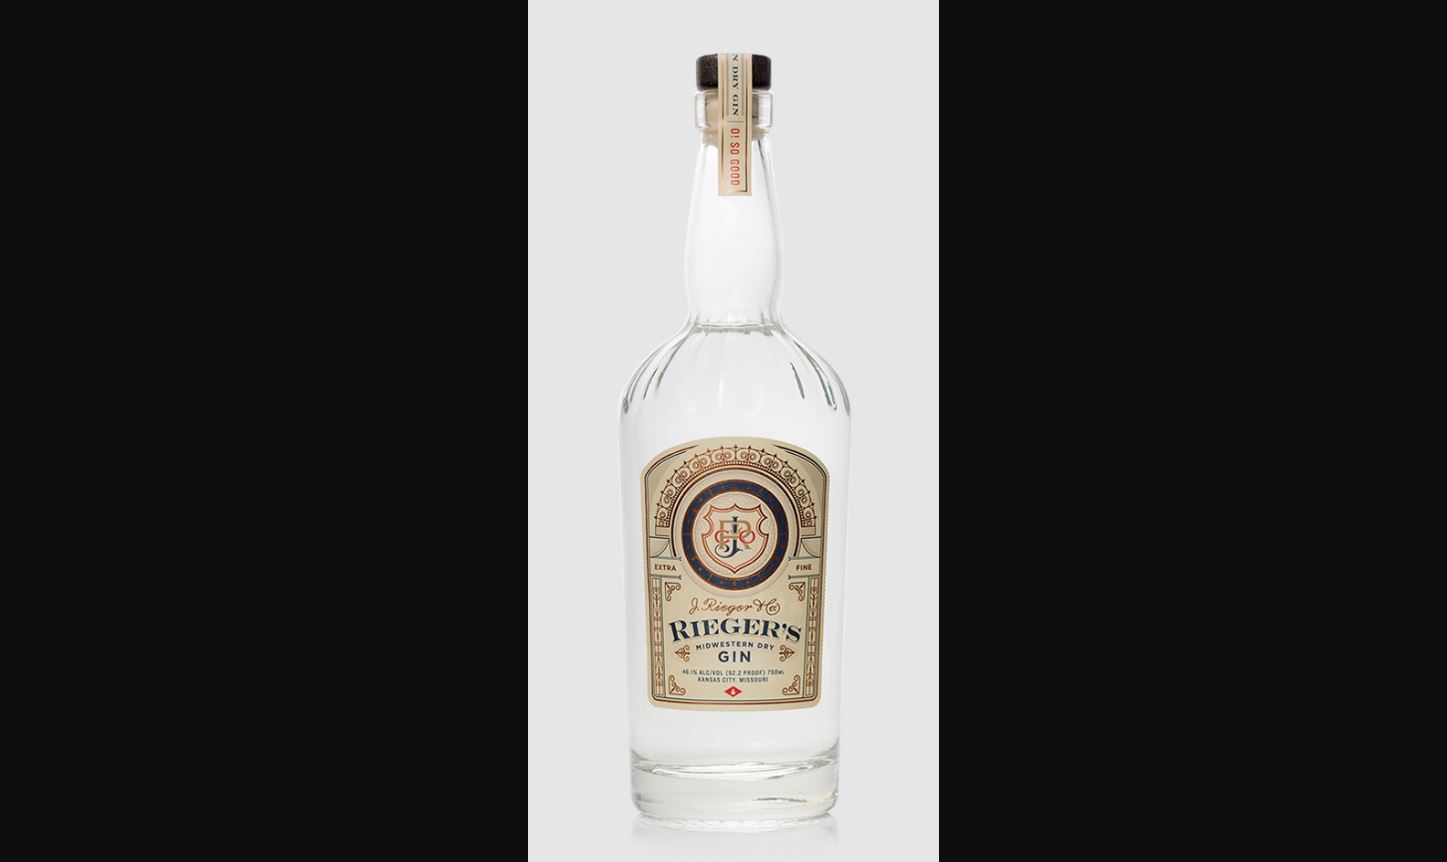 Rieger's Midwestern Gin